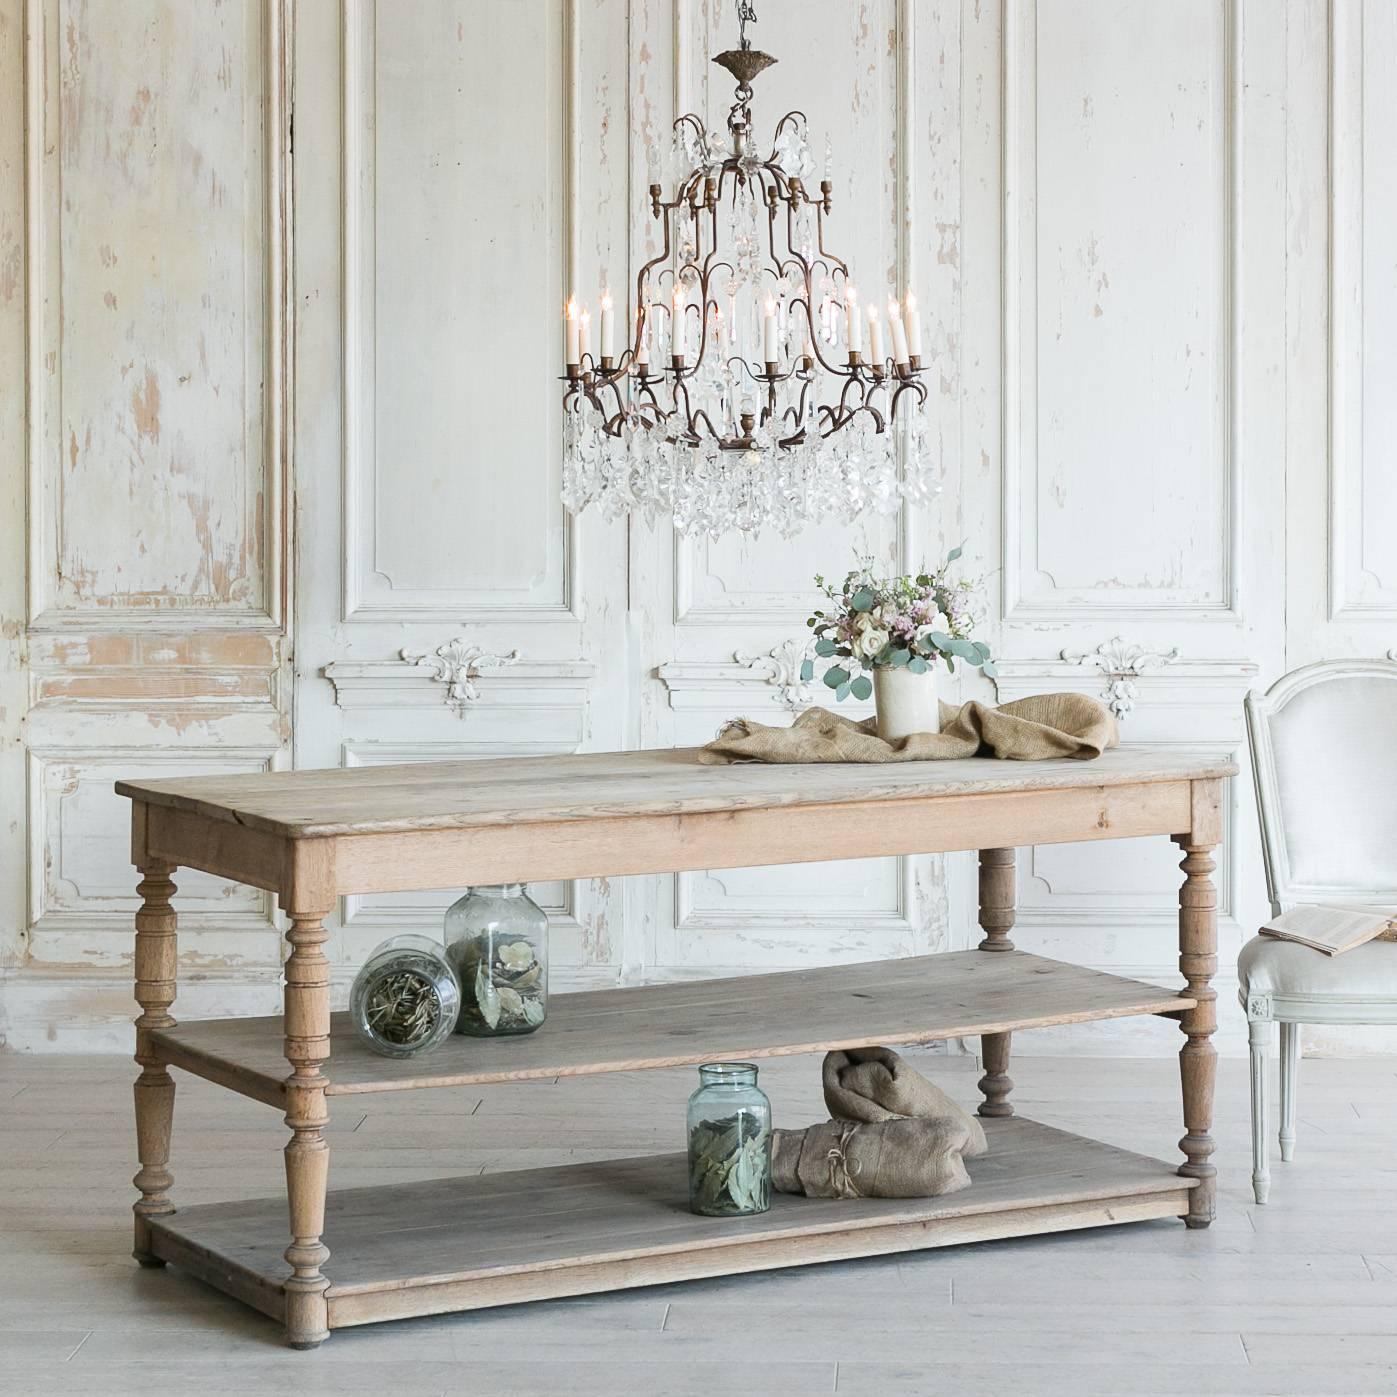 Gorgeous three-tiered antique oak drapery table featuring a second level for convenient storage or display. Large and broad, this piece boasts a spacious work space perfect for a large project or kitchen stash. Simple turned legs add stability and